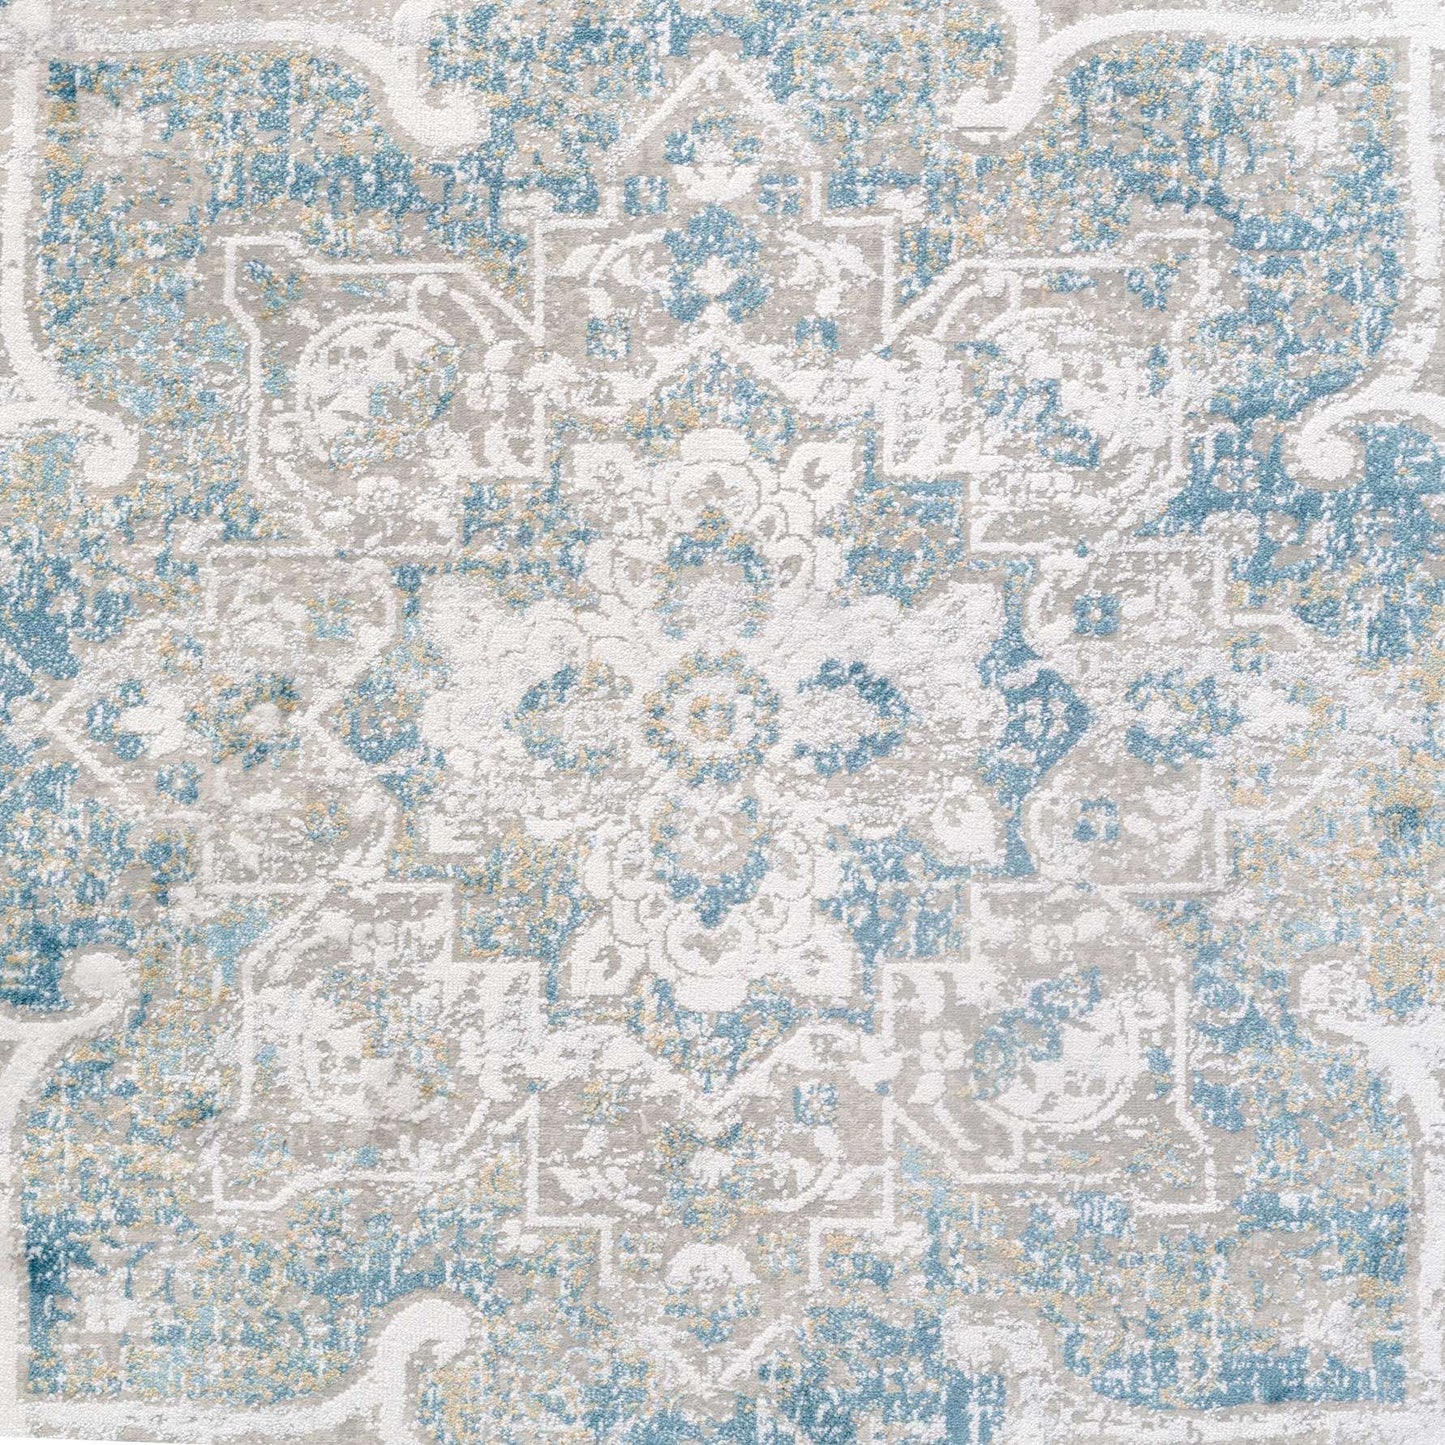 Traditional Blue Distressed Motif Hall Runner Rug